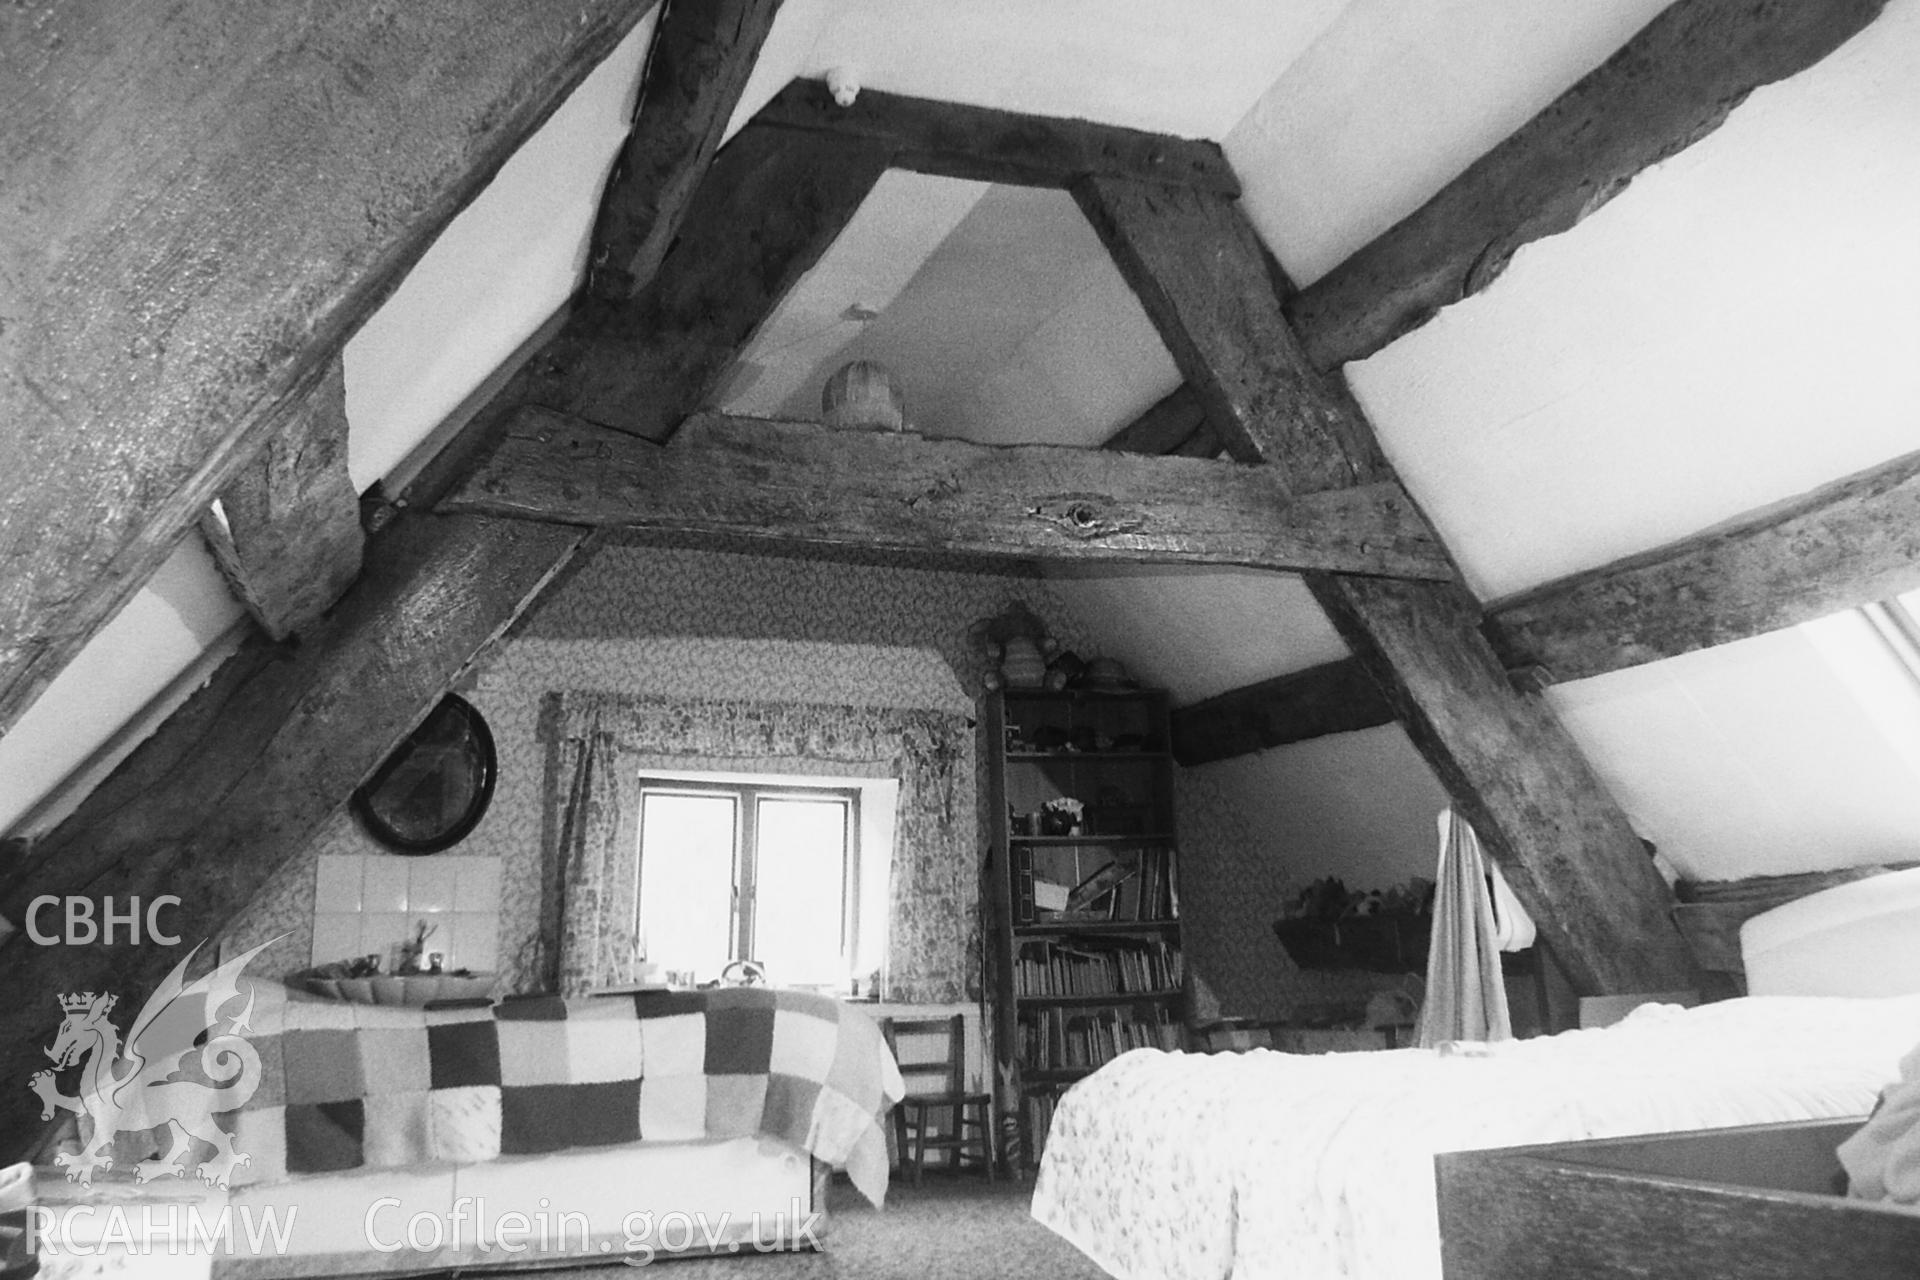 Black and white photo showing interior view of Chapel Farm, taken by Paul R. Davis, undated.